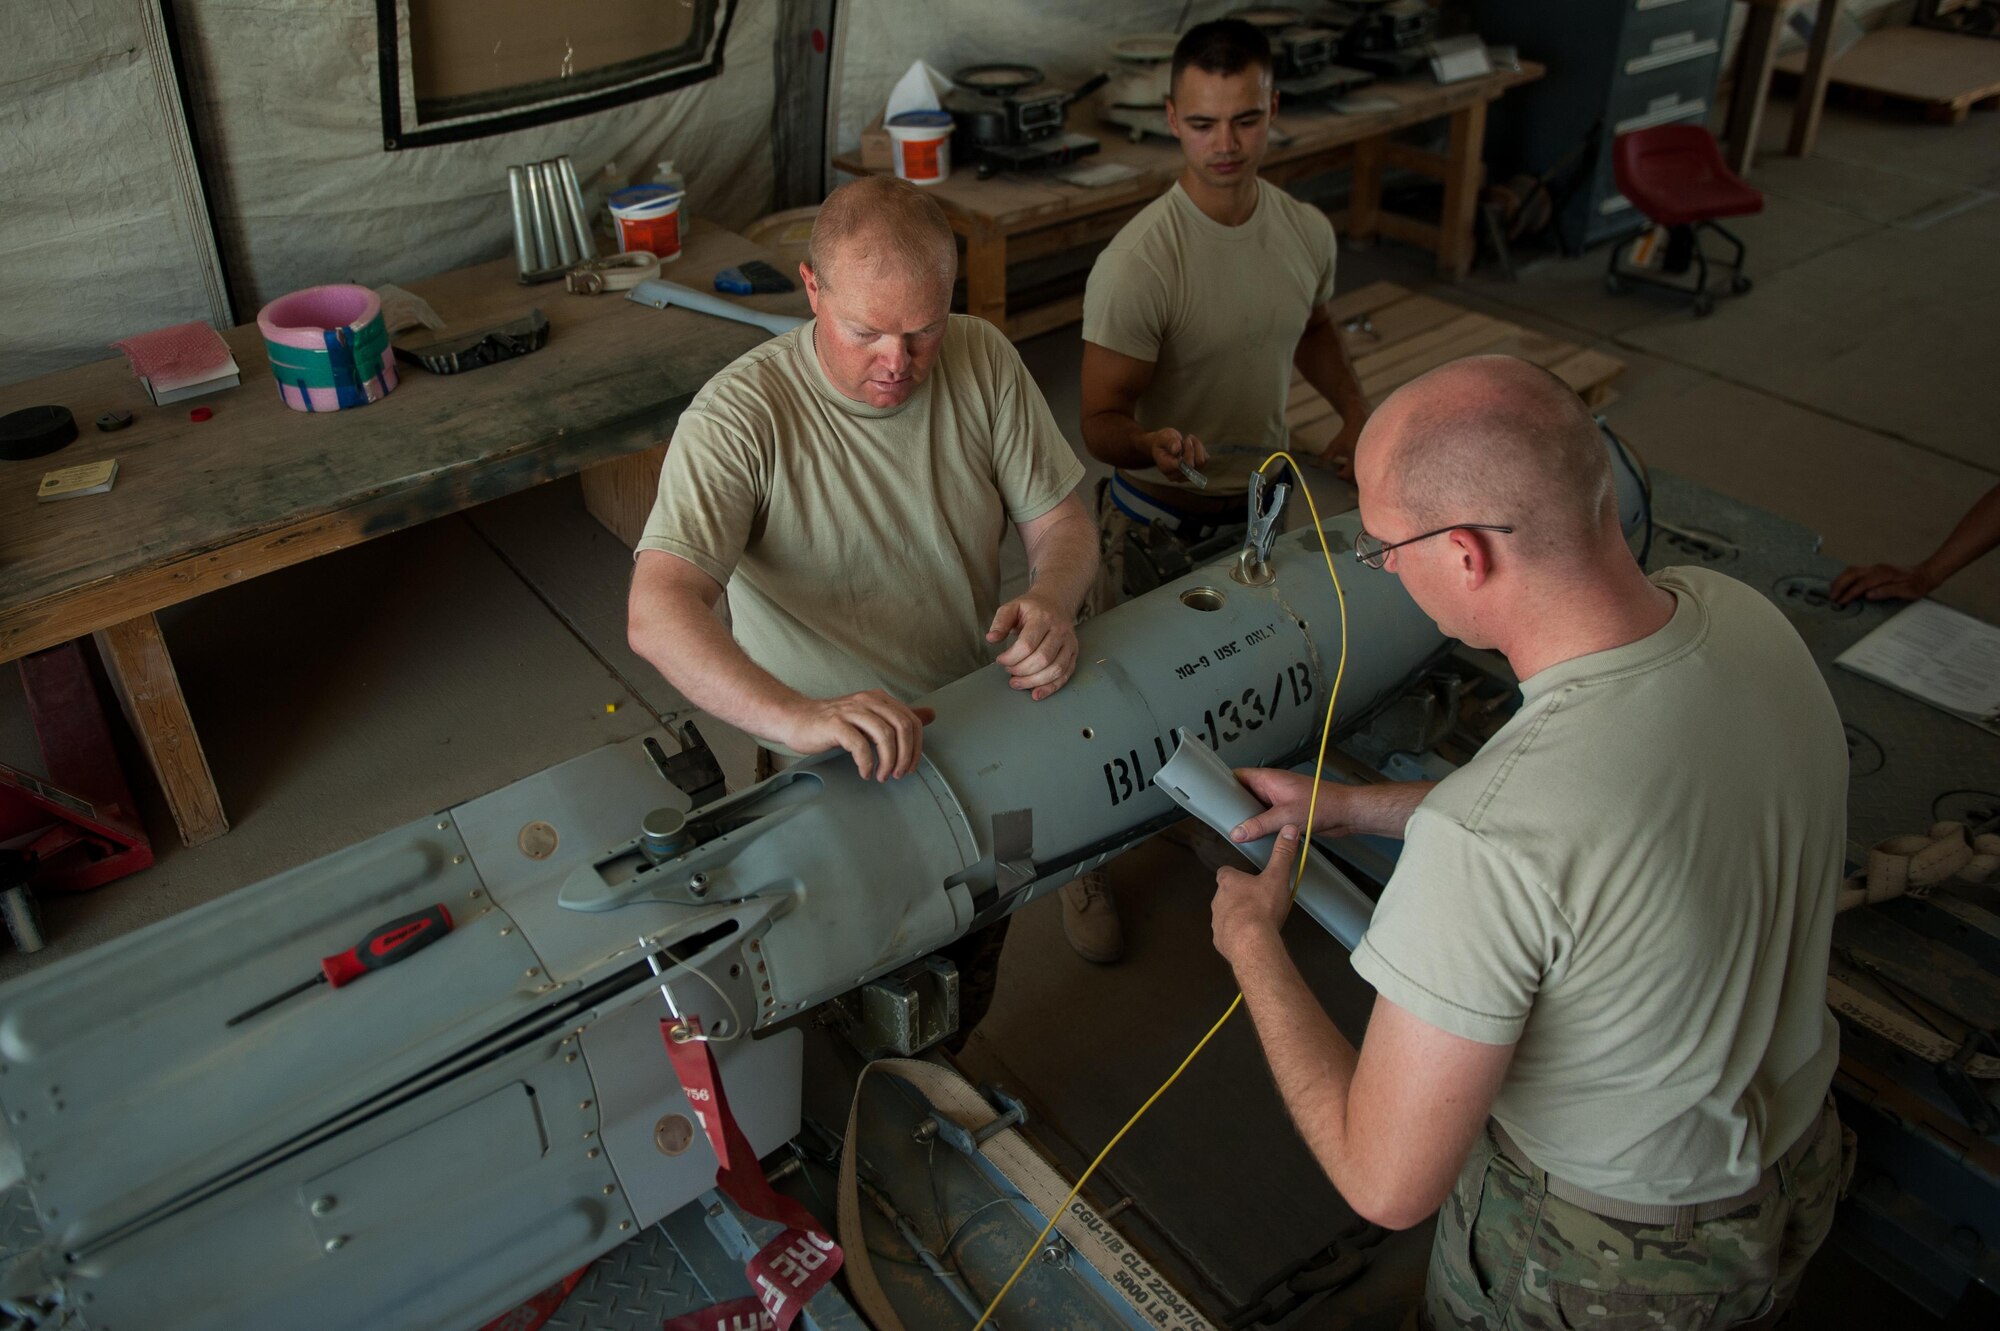 U.S. Airmen assigned to the 62nd Expeditionary Reconnaissance Squadron munitions flight, build a GPS-guided GBU-49 weapon at Kandahar Airfield, Afghanistan, Aug. 15, 2015.  The 62nd ERS Munitions Flight ensures that every munition loaded onto an MQ-1 Predator and MQ-9 Reaper will perform as expected when used. (U.S. Air Force photo by Tech. Sgt. Joseph Swafford/Released)